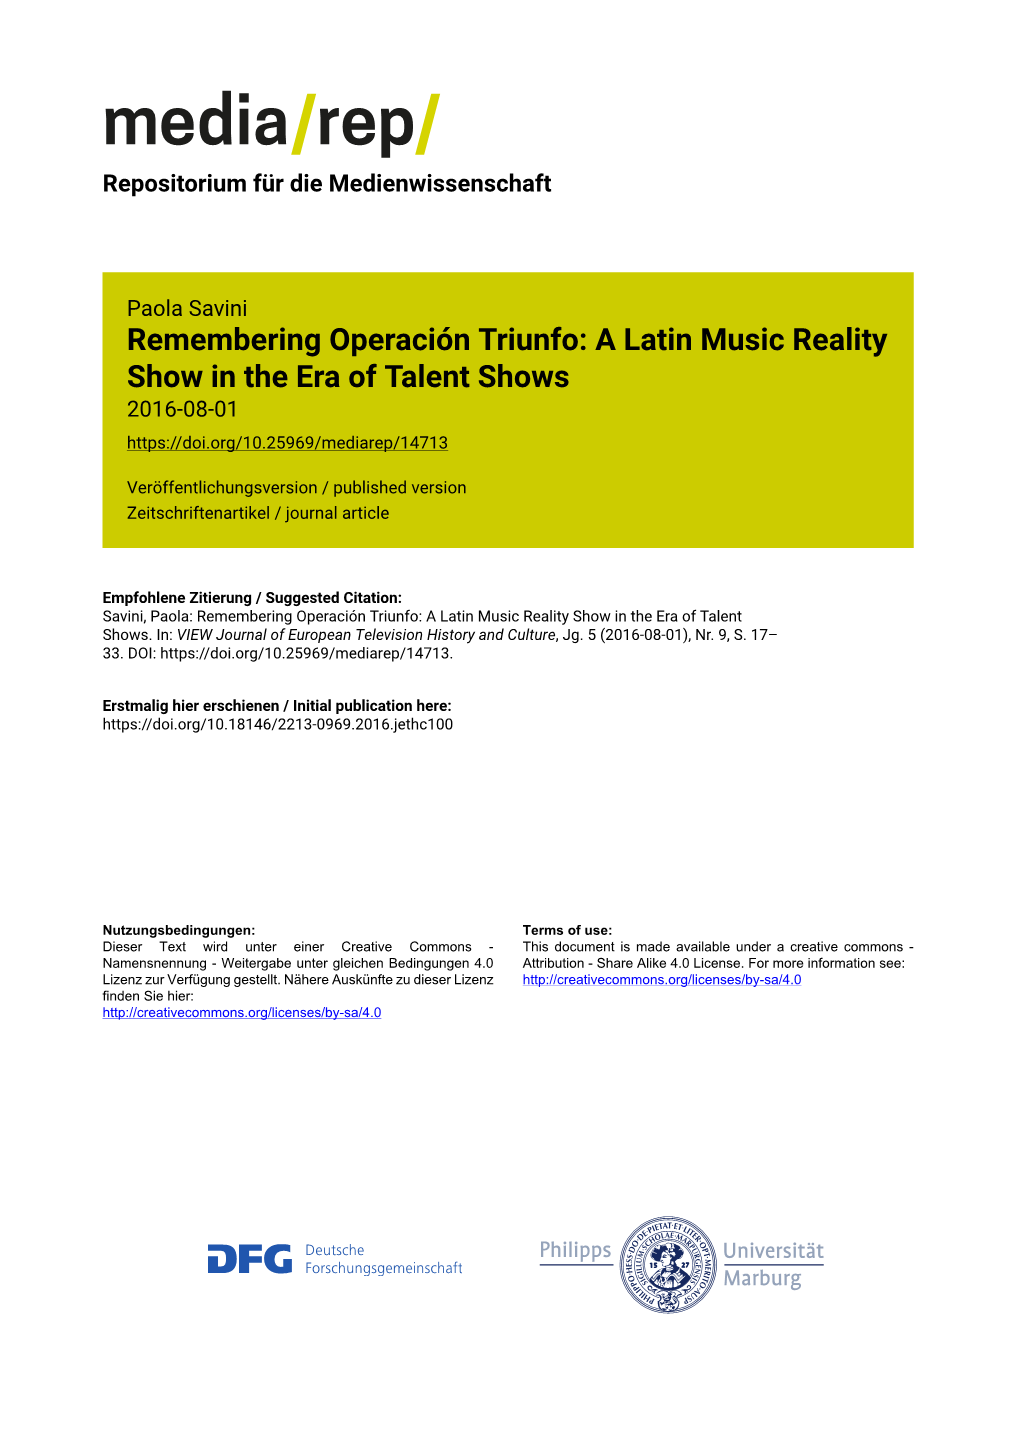 Remembering Operación Triunfo: a Latin Music Reality Show in the Era of Talent Shows 2016-08-01